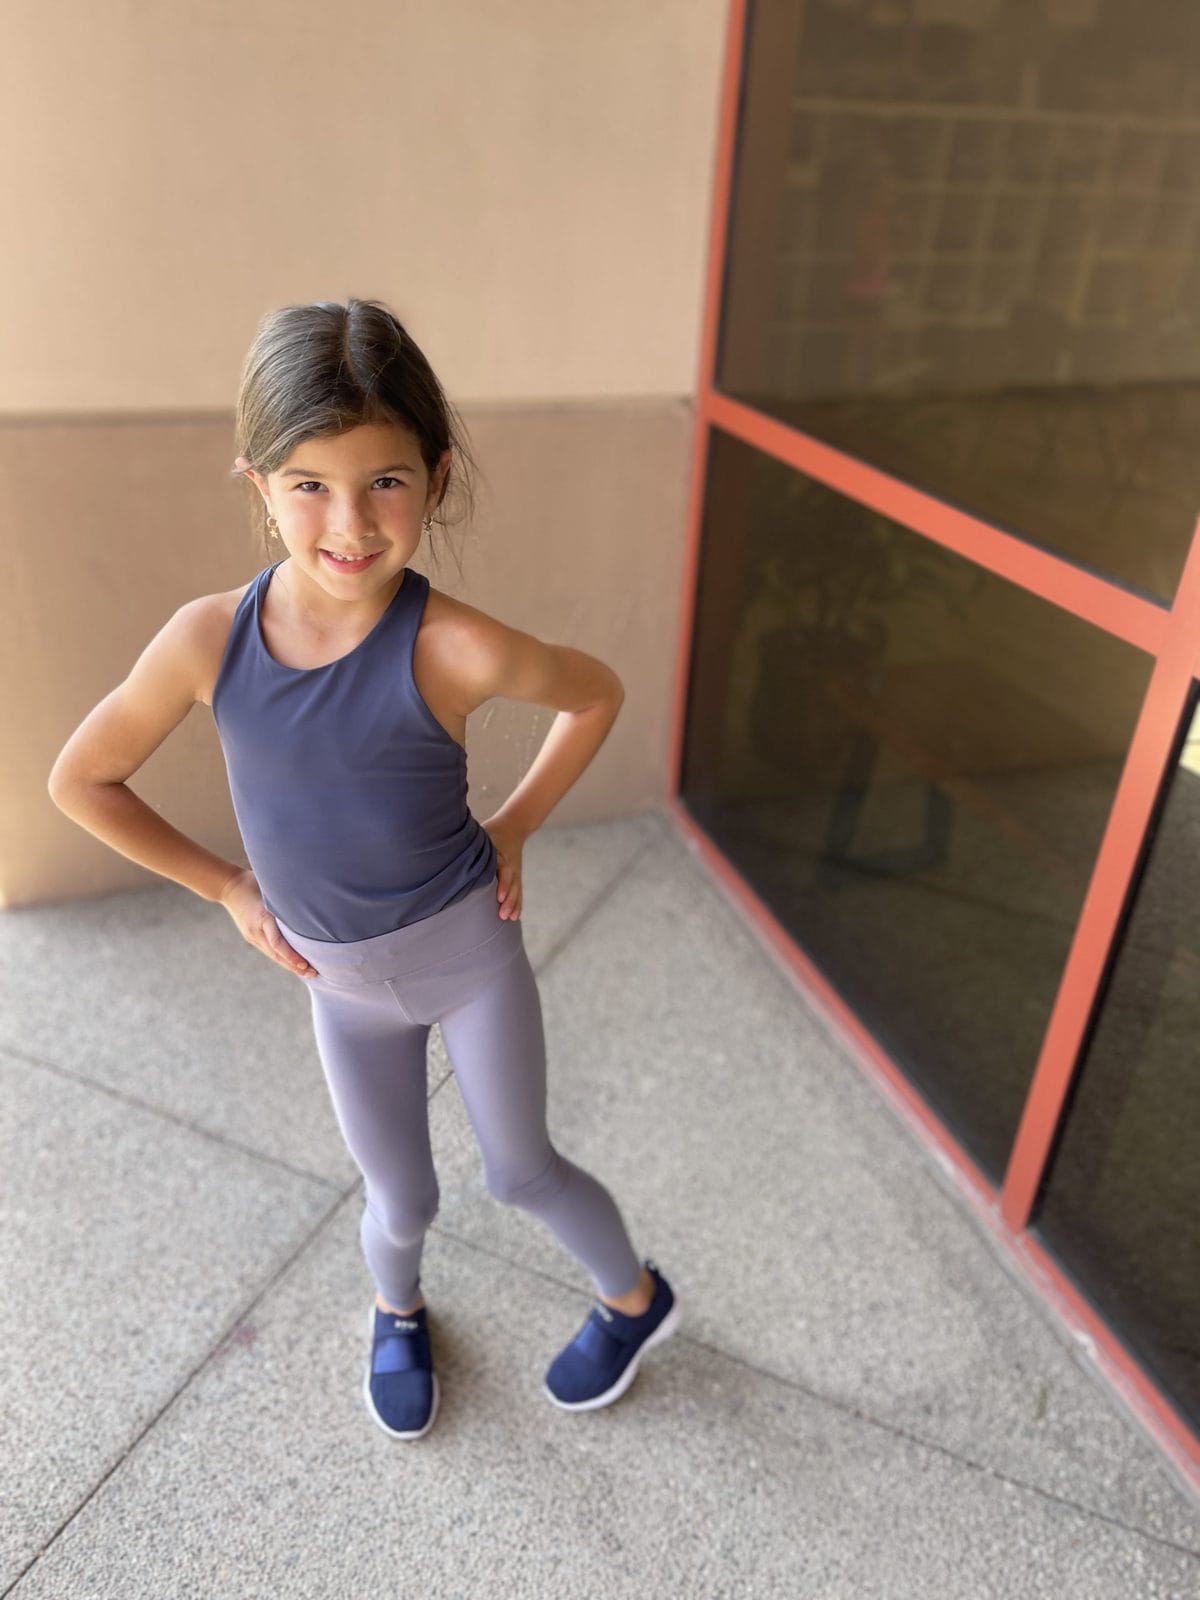 Your after-school activities just got cuter with Athleta